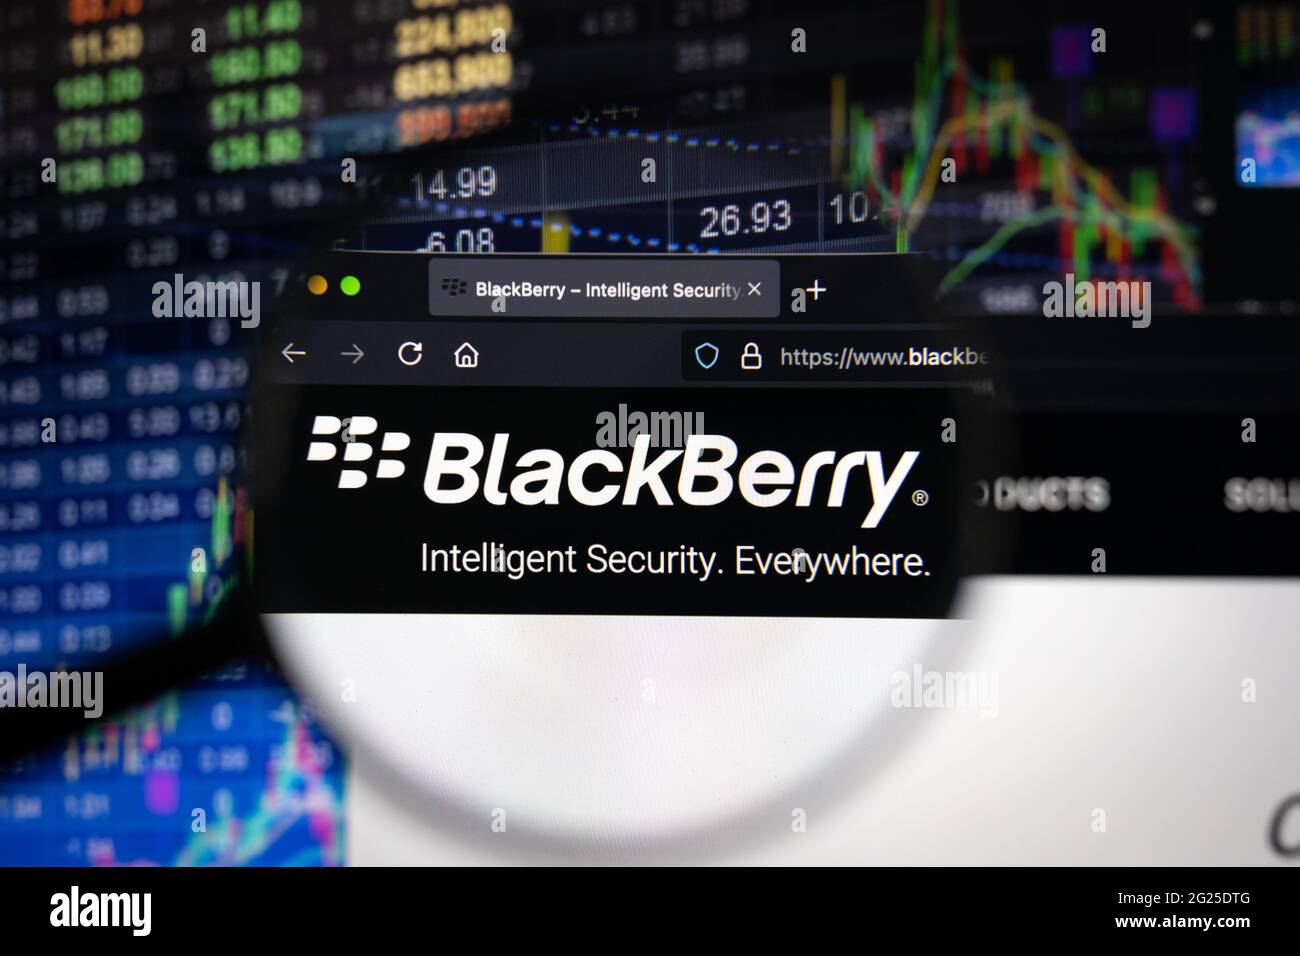 KAUFBEUREN, GERMANY - June 8, 2021: BlackBerry company logo on a website with blurry stock market developments in the background, seen on a computer s Stock Photo